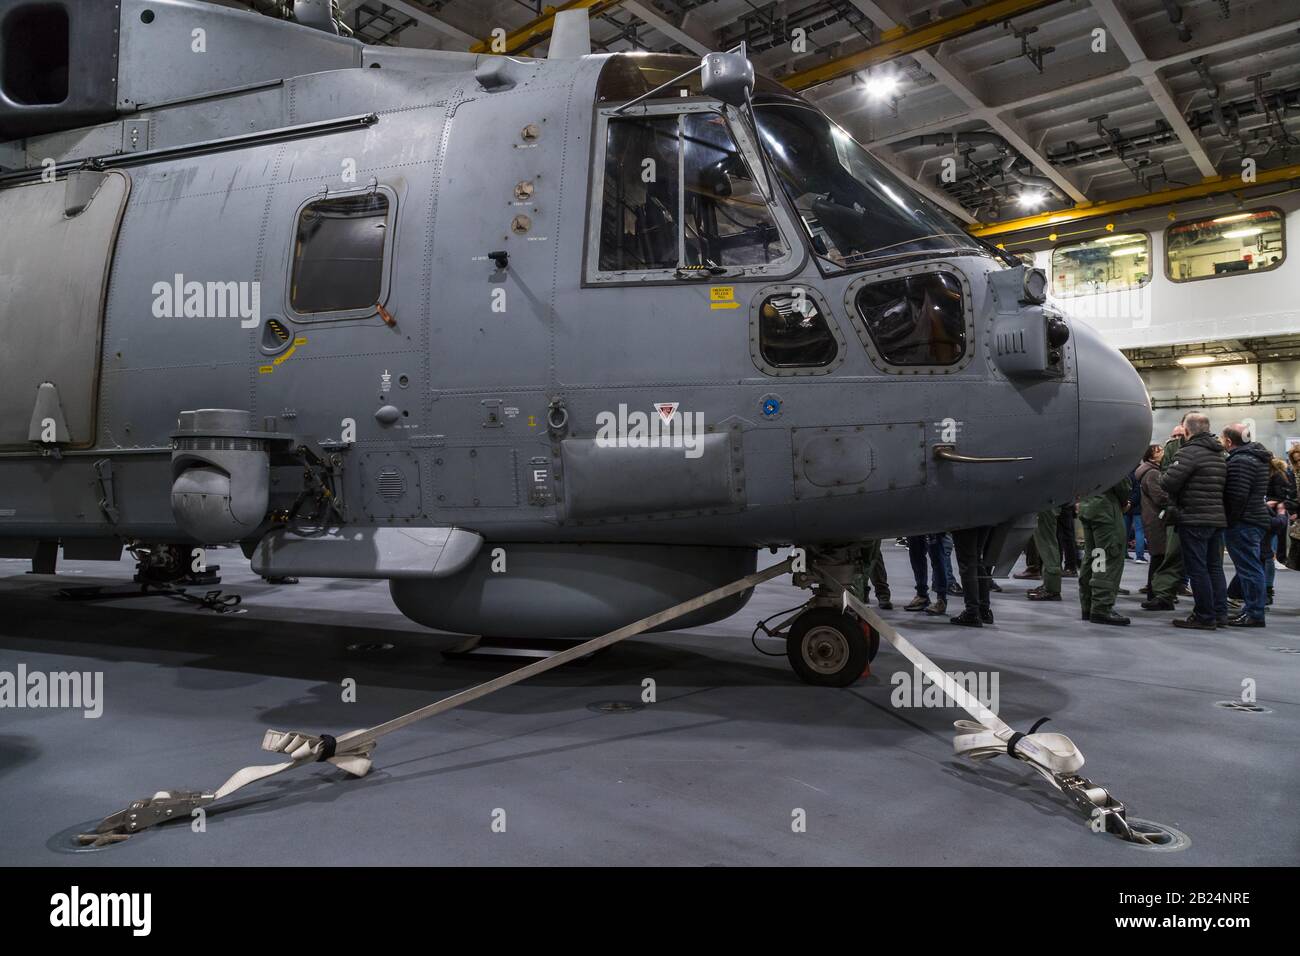 Royal Navy Merlin tied town in a hanger on board HMS Prince of Wales on 29 February 2020 in Liverpool. Stock Photo